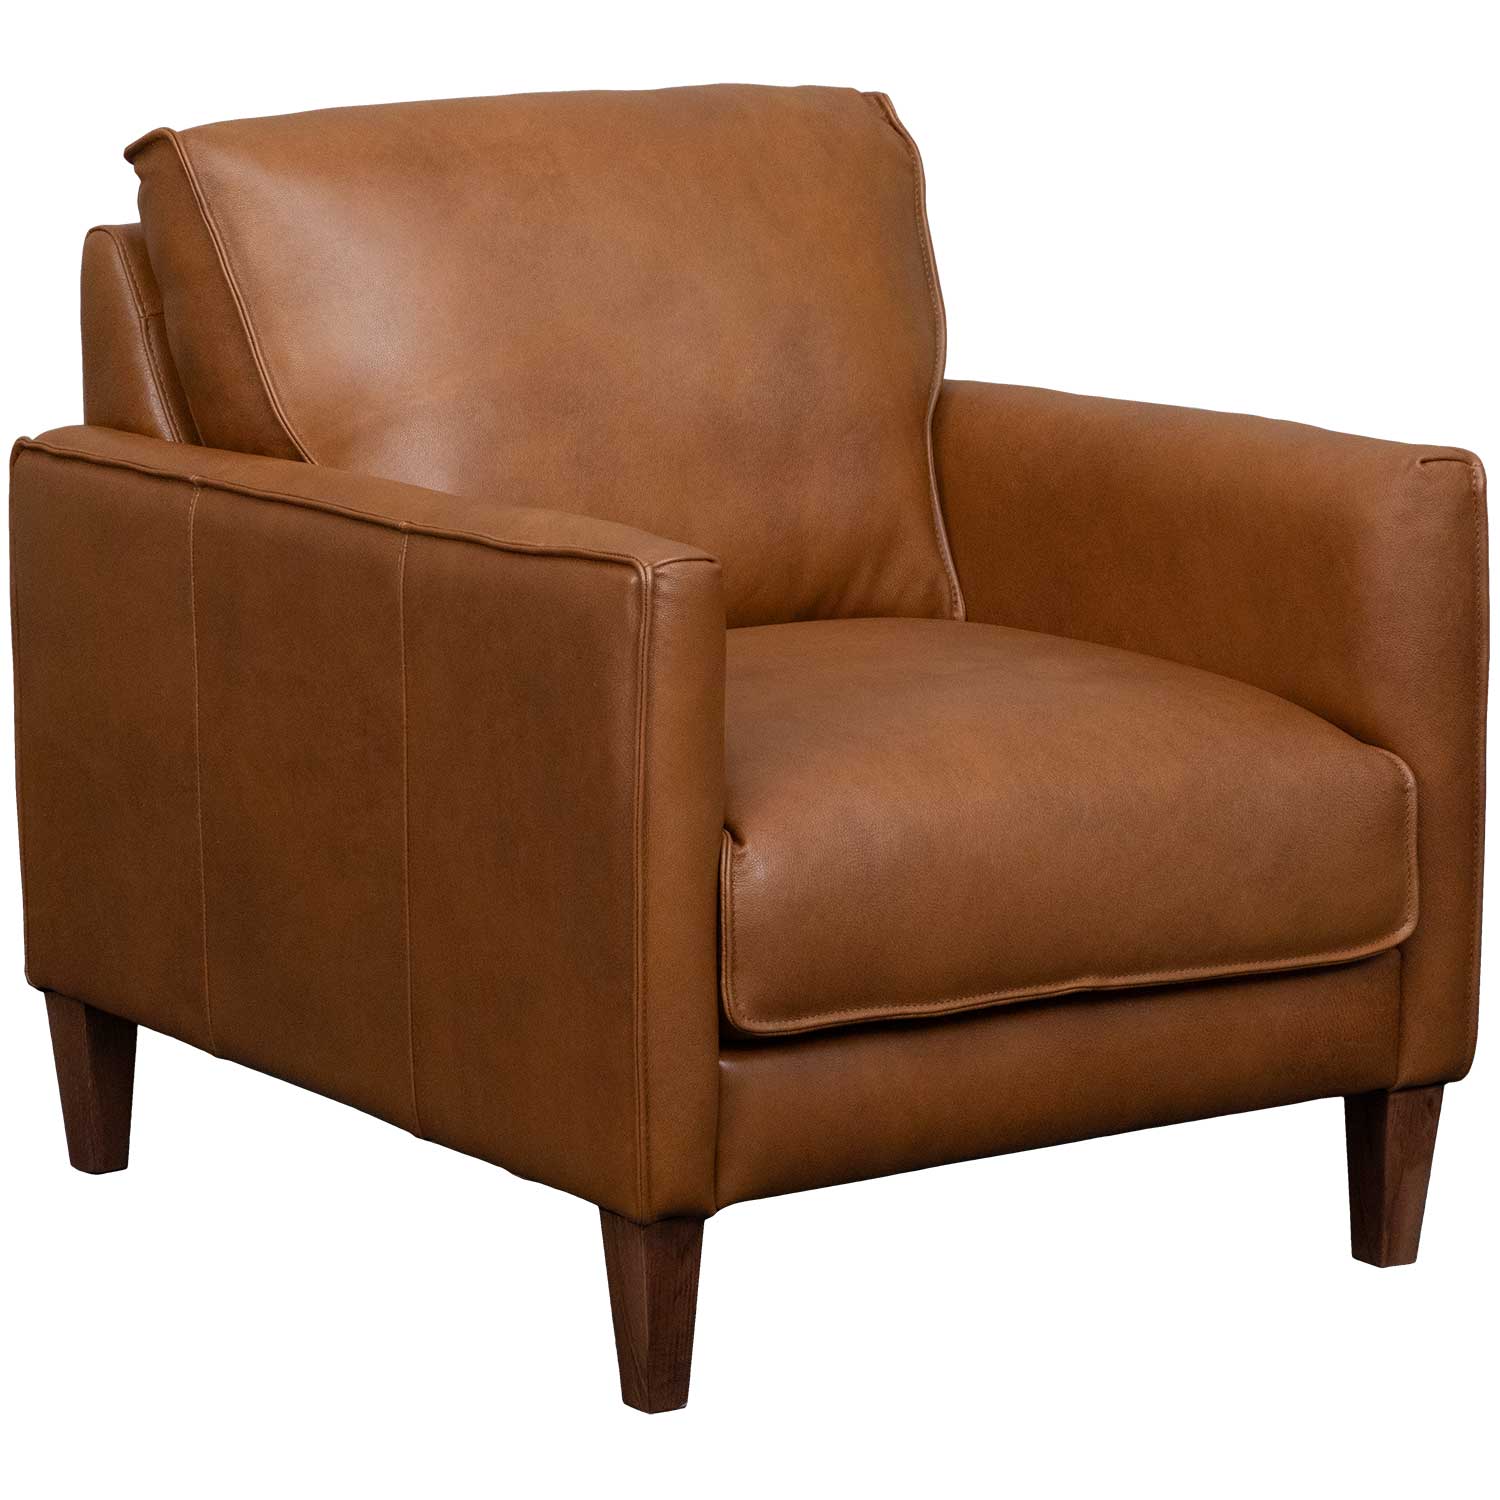 Italian Leather Dutton Soft - All Line Chair